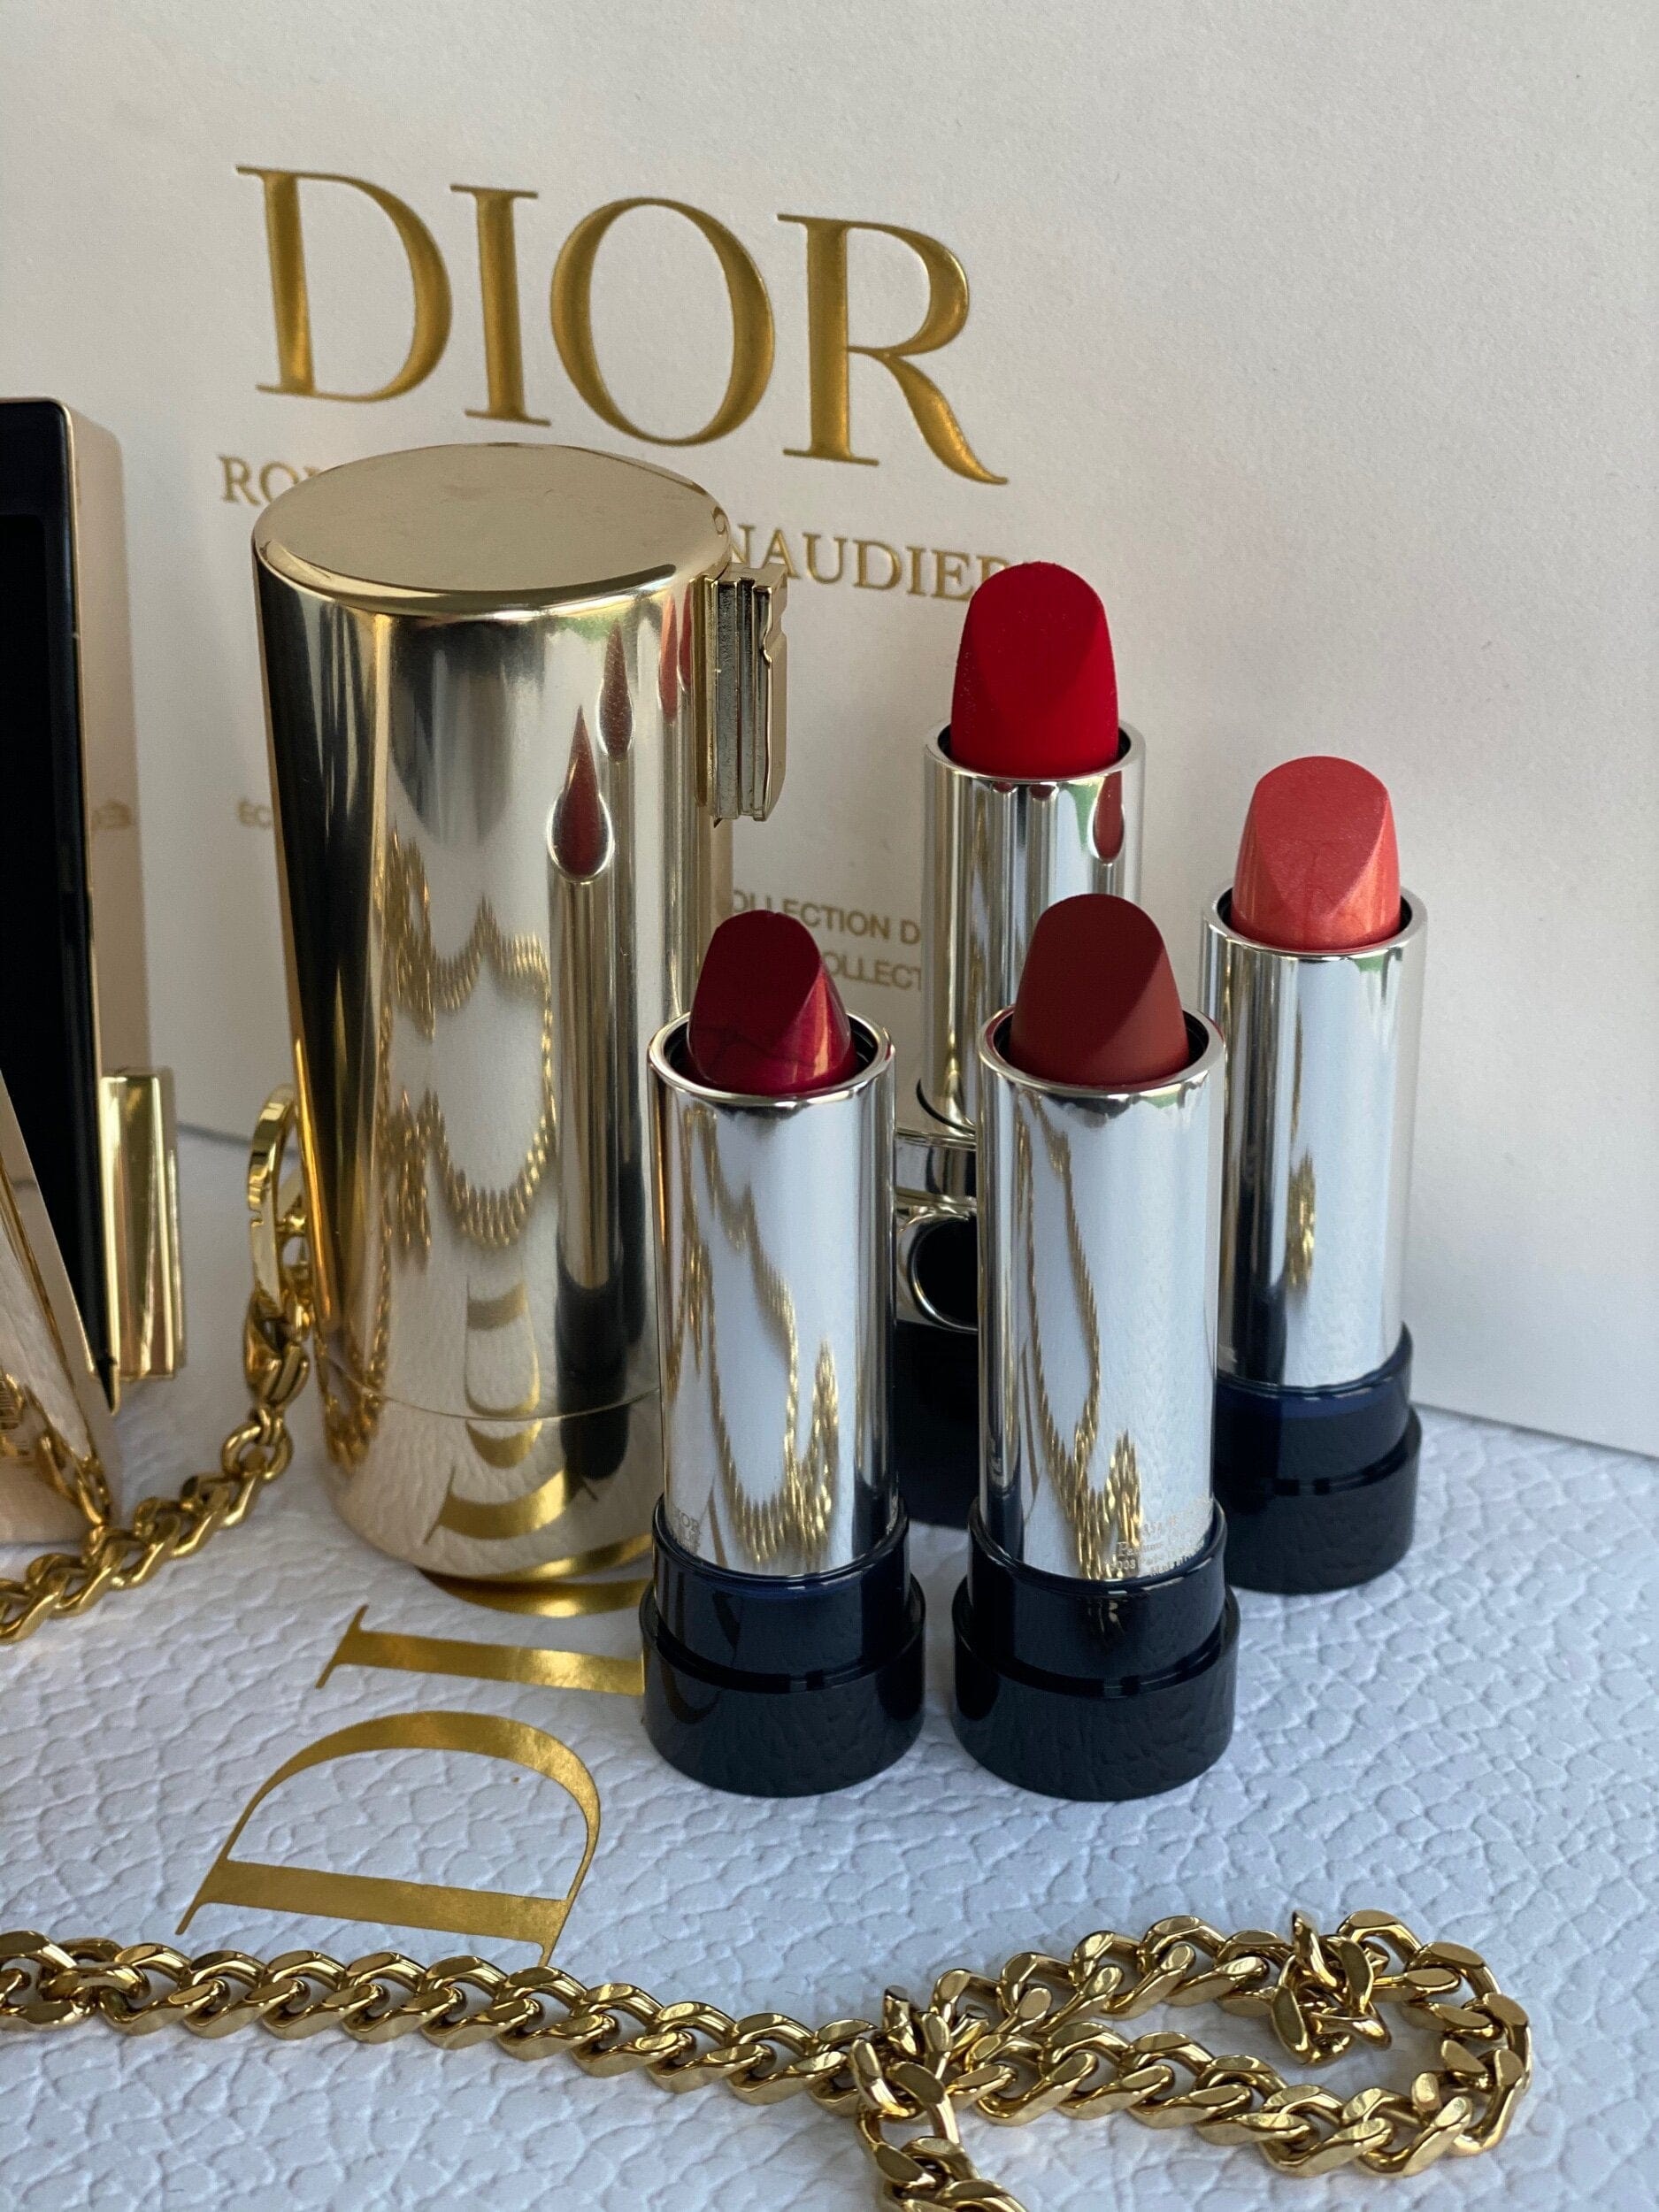 DIOR Rouge Dior Minaudiere - The Atelier of Dreams Limited Edition 